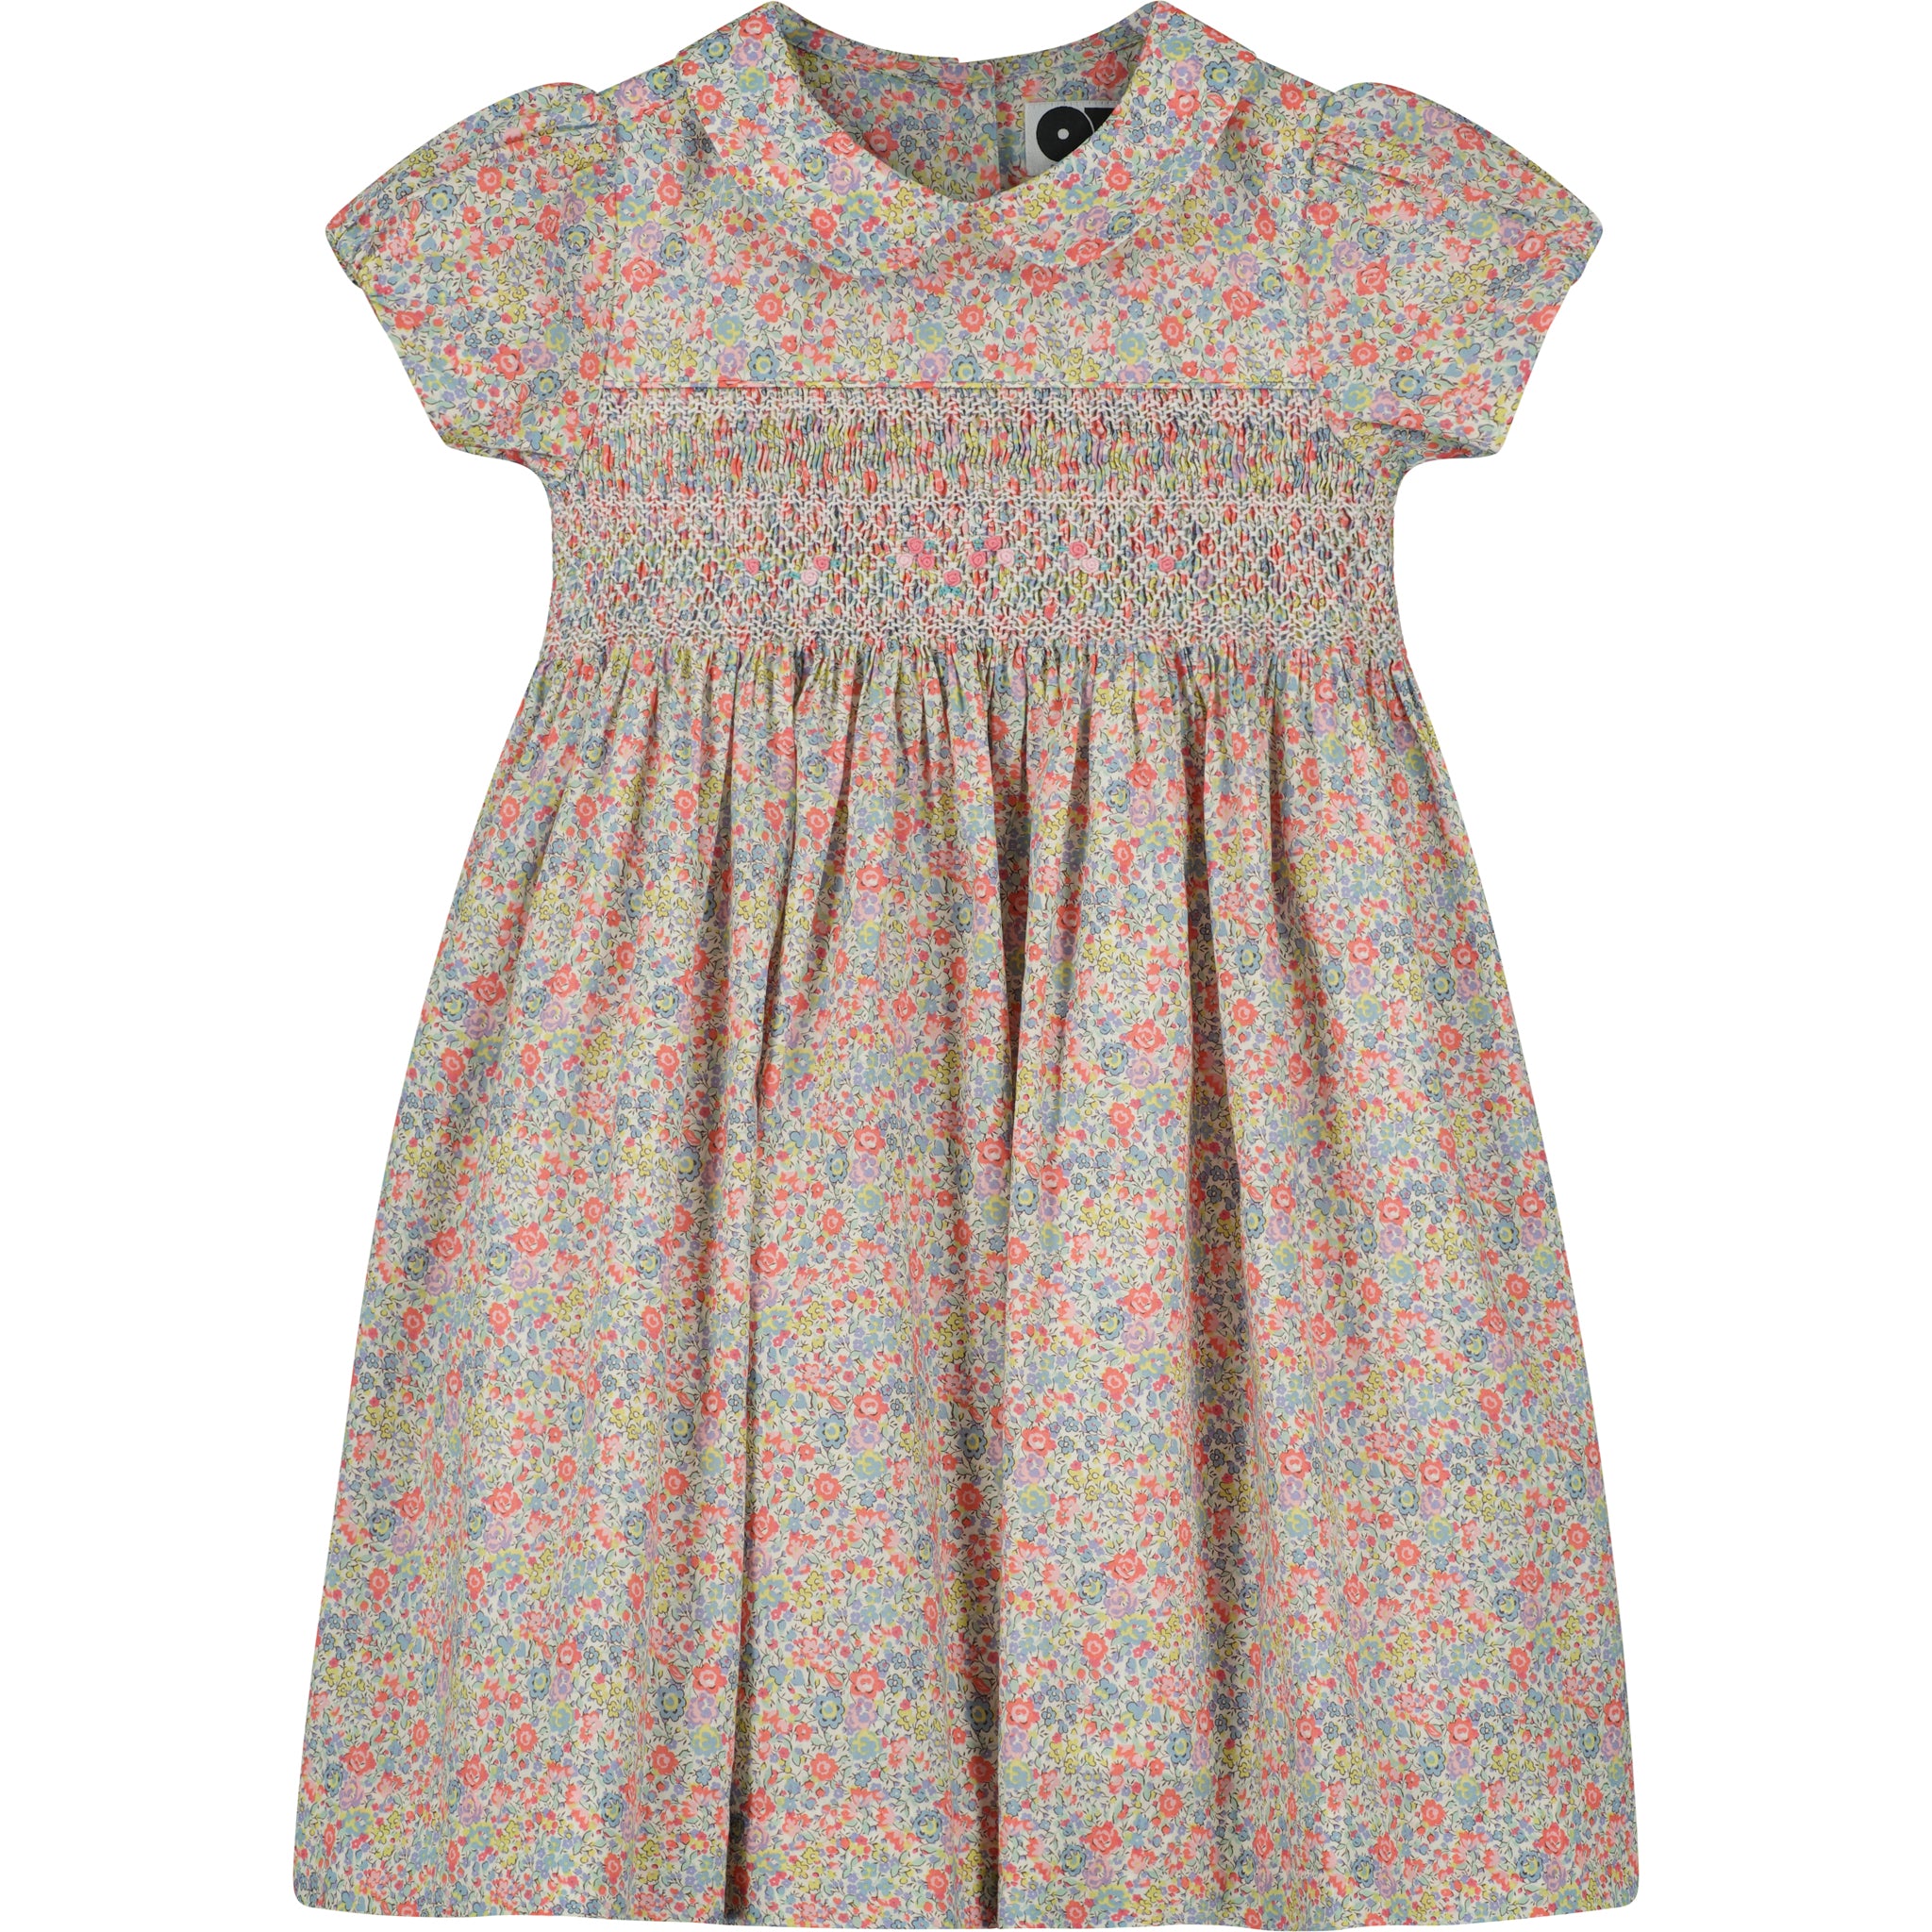 Floral Liberty girls dress with smocking, front